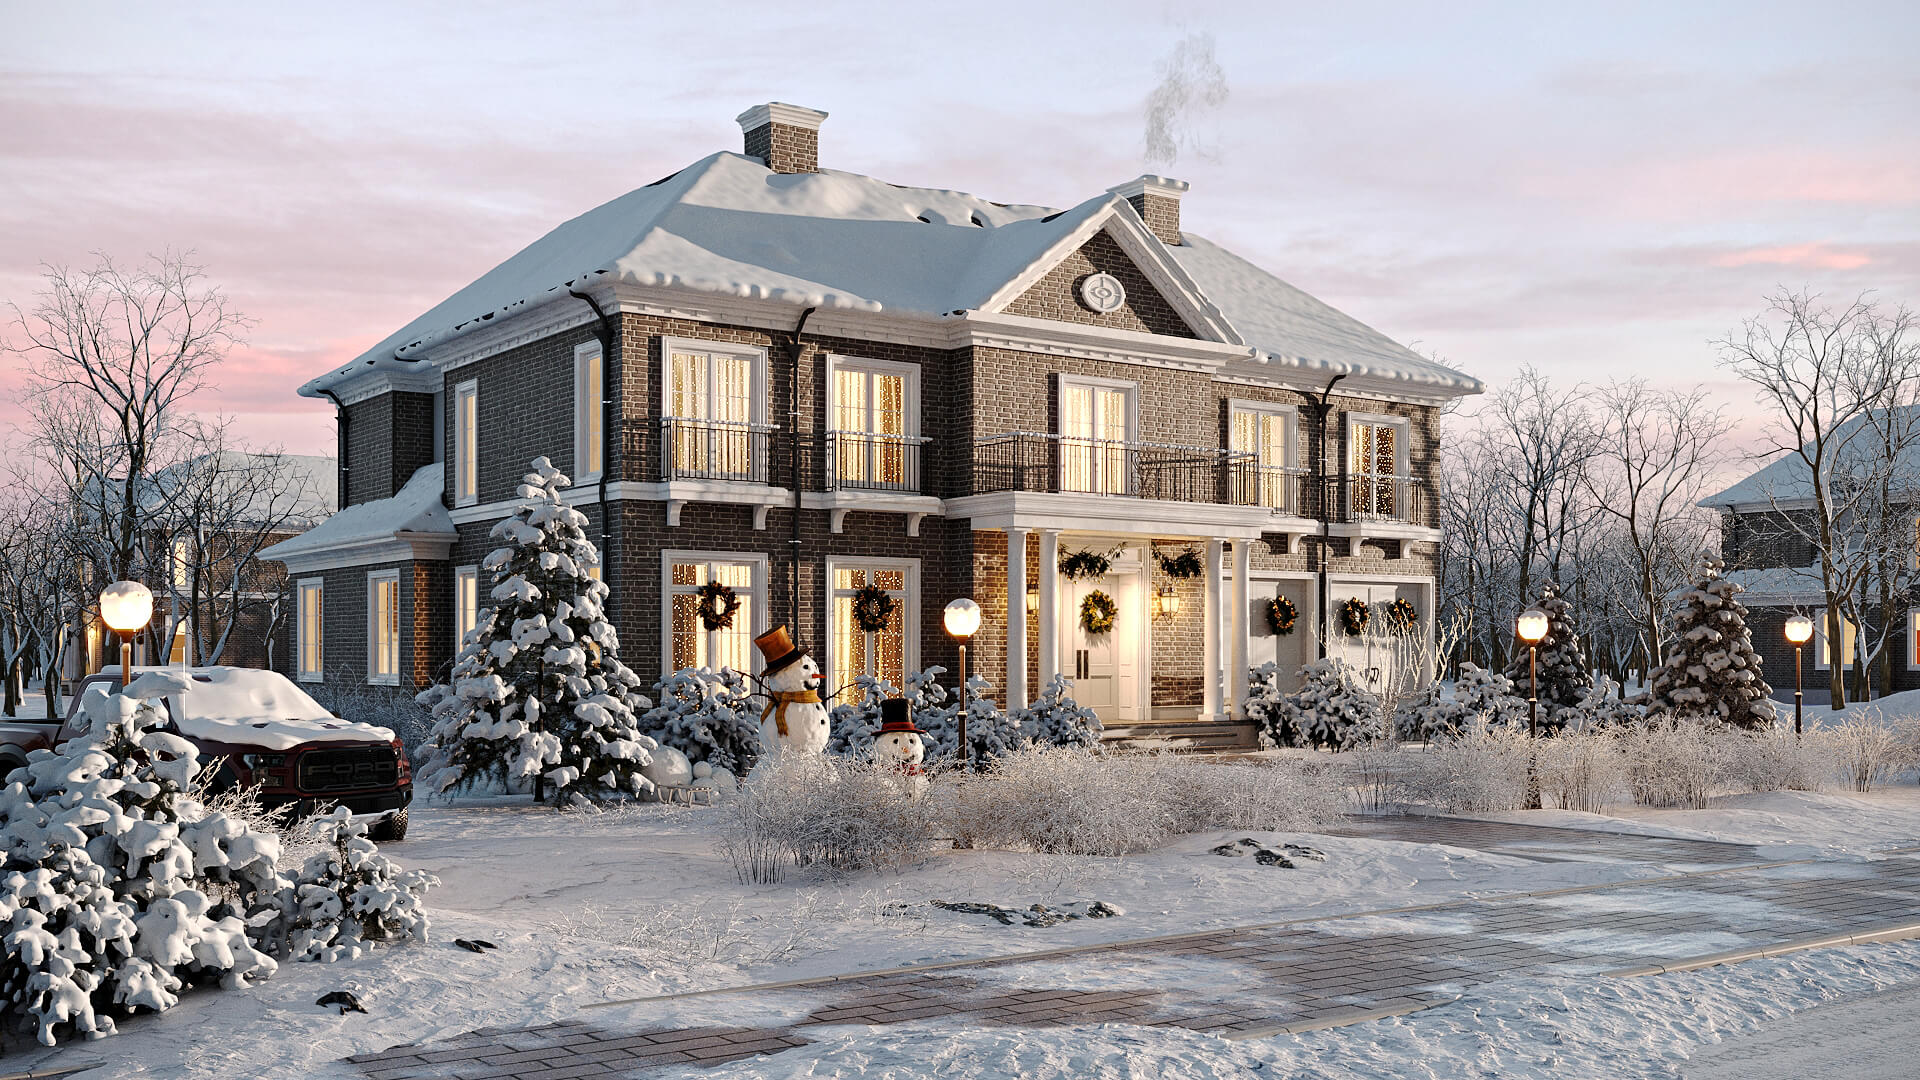 Atmospheric Architectural CGI with a Winter Setting